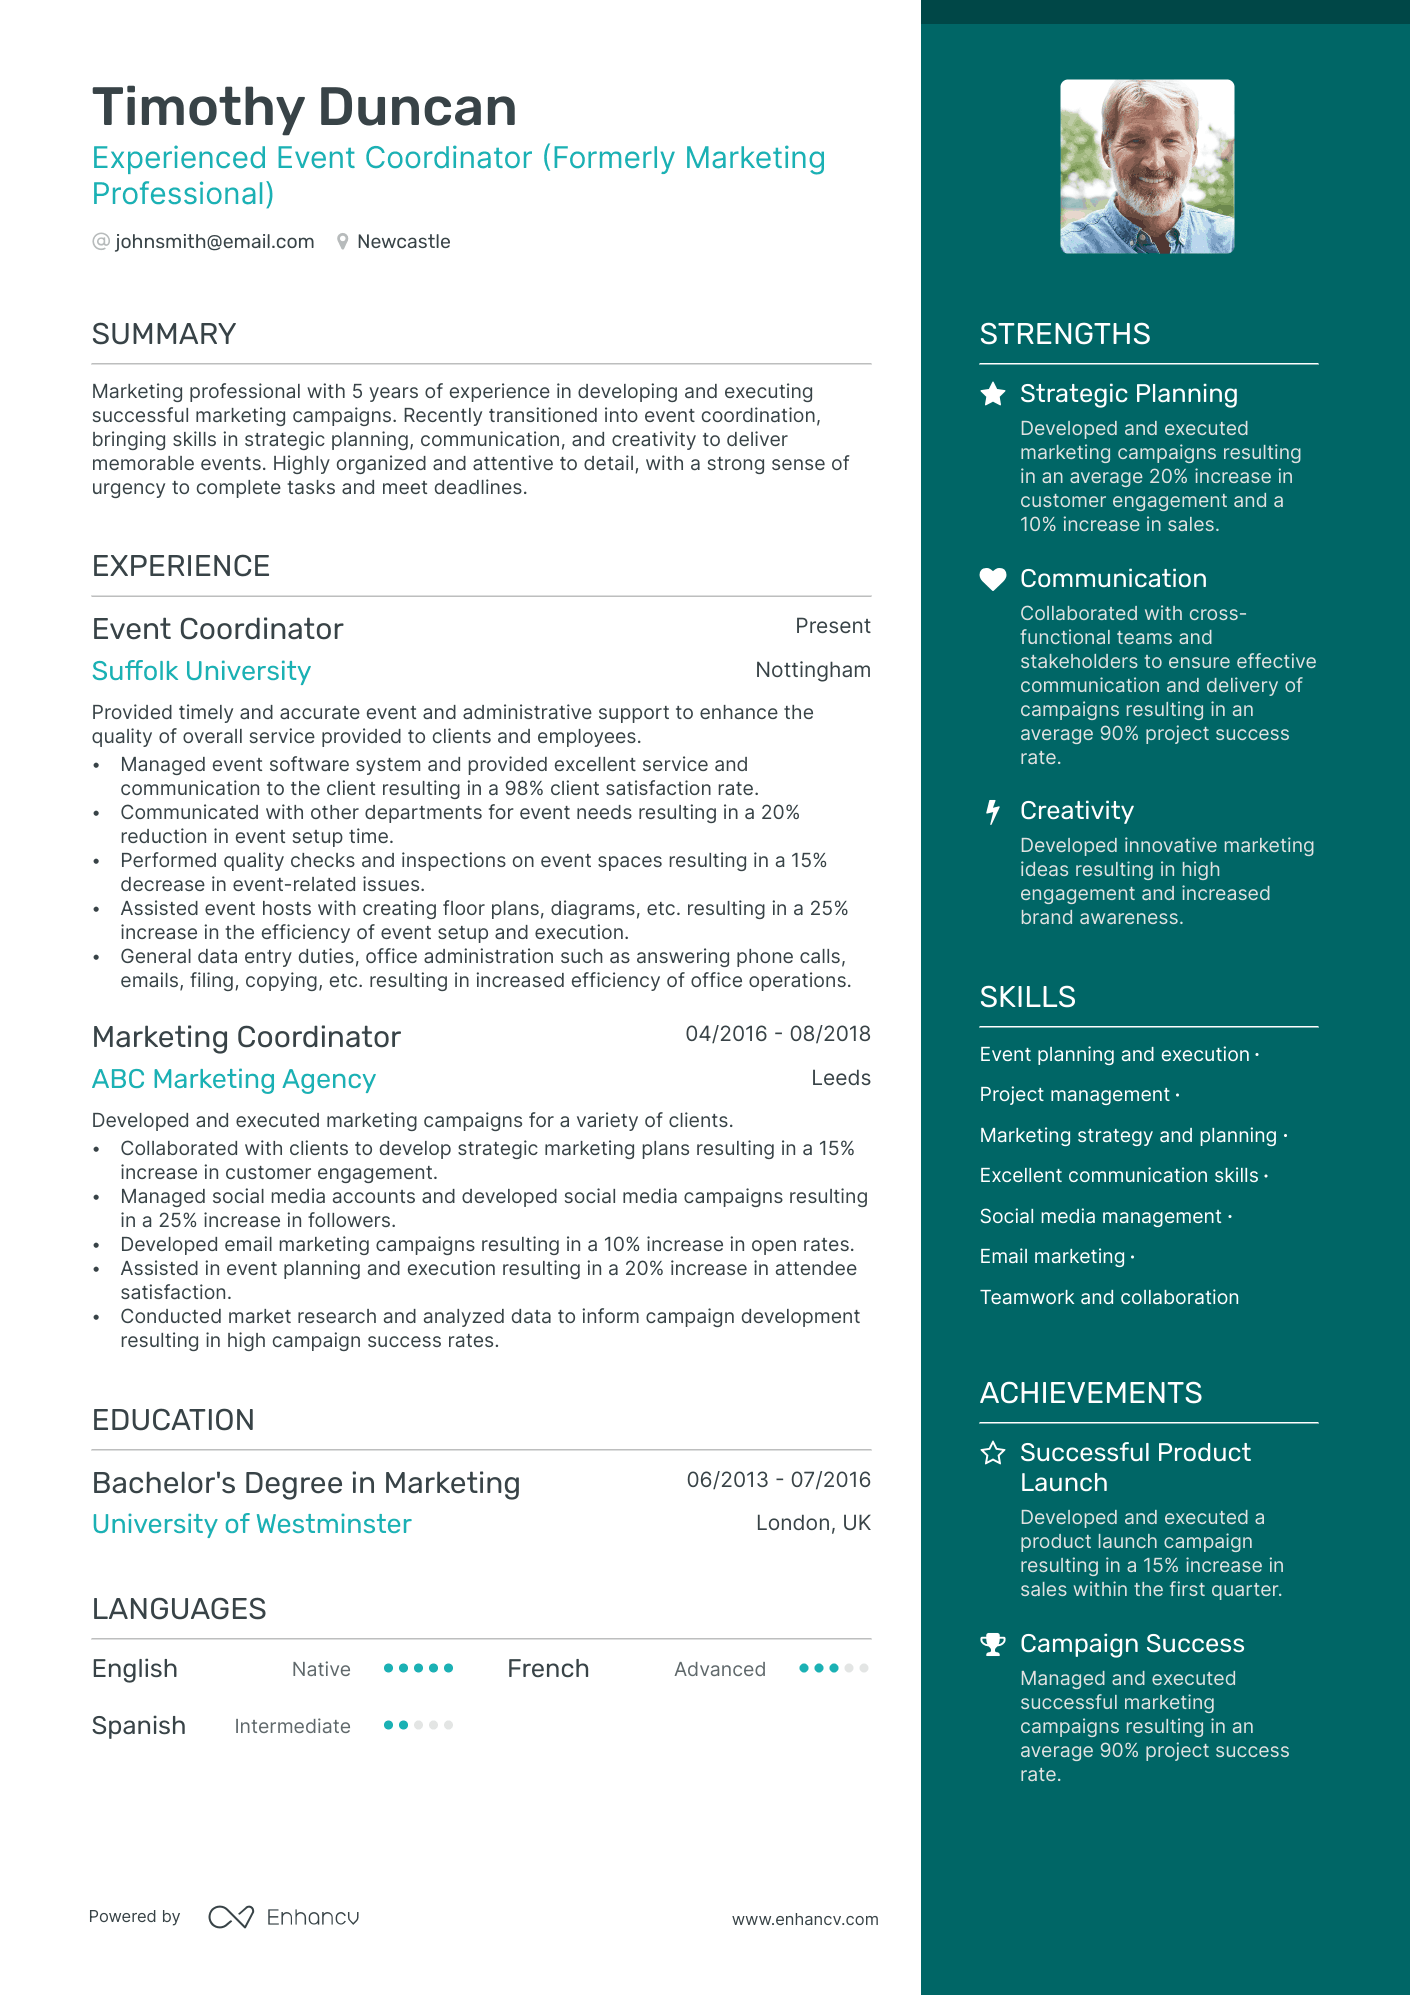 Experienced Event Coordinator (Formerly Marketing Professional) CV example